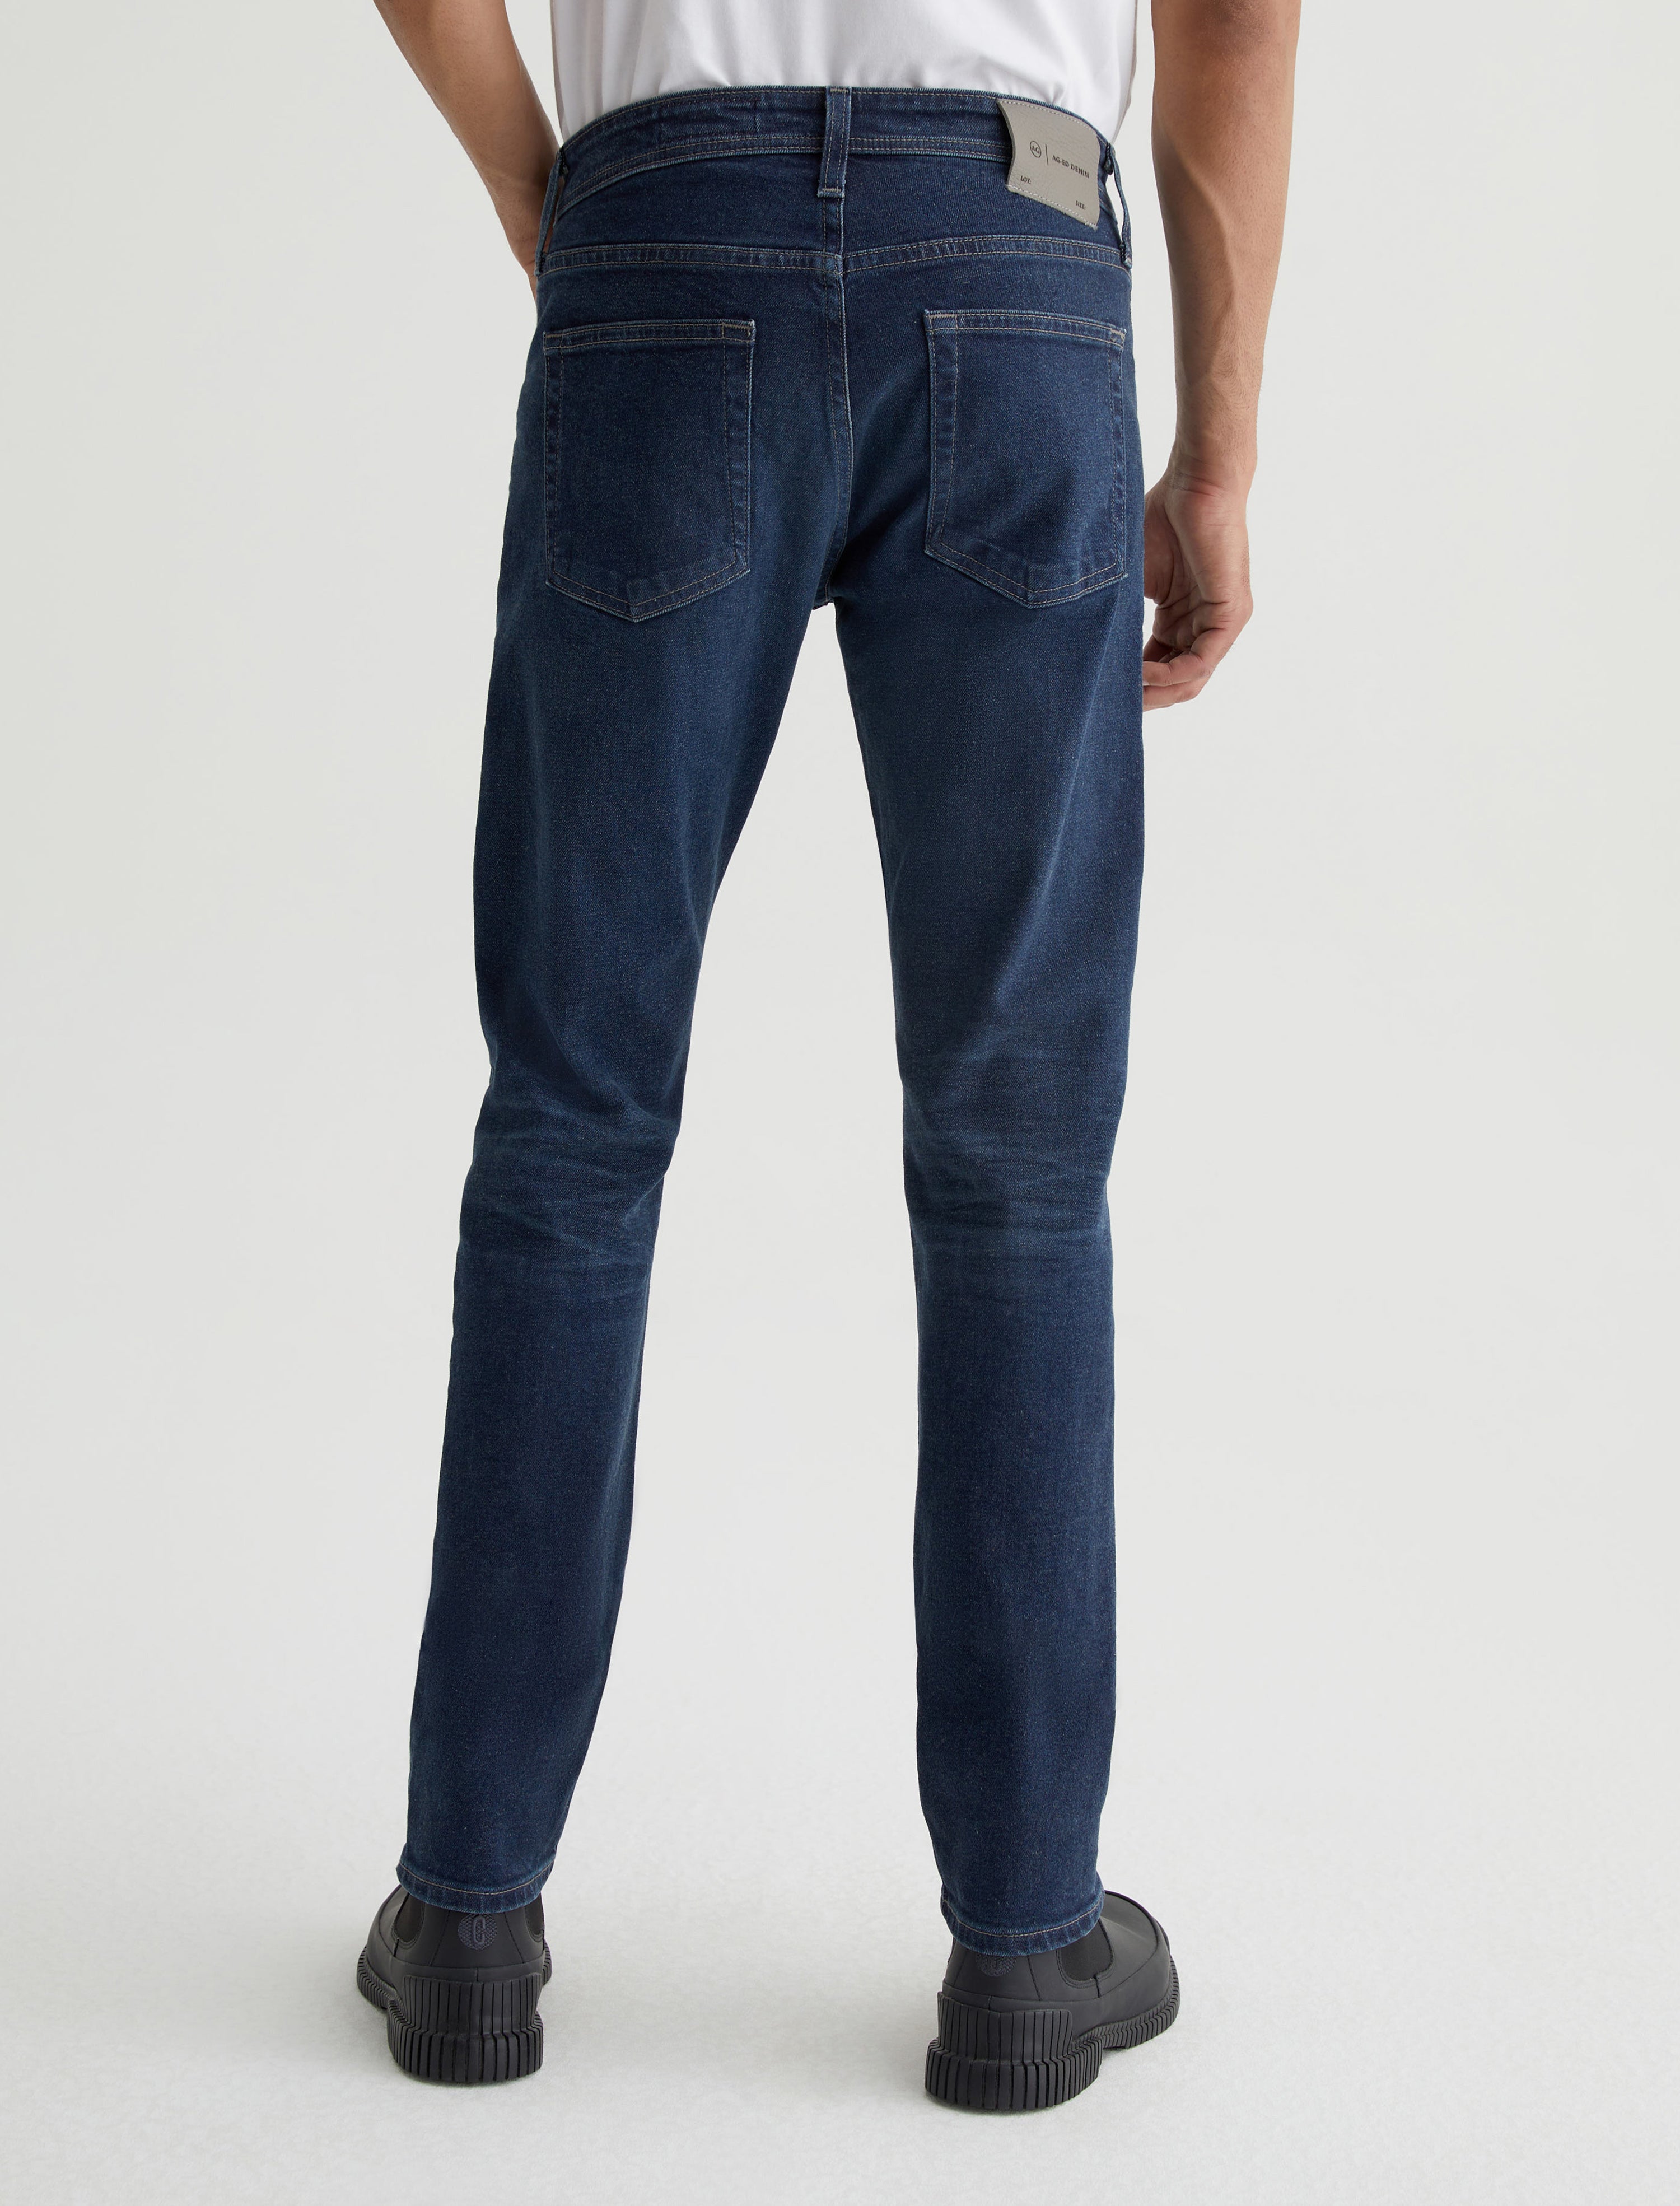 Mens Tellis 4 Years Sedona at AG Jeans Official Store